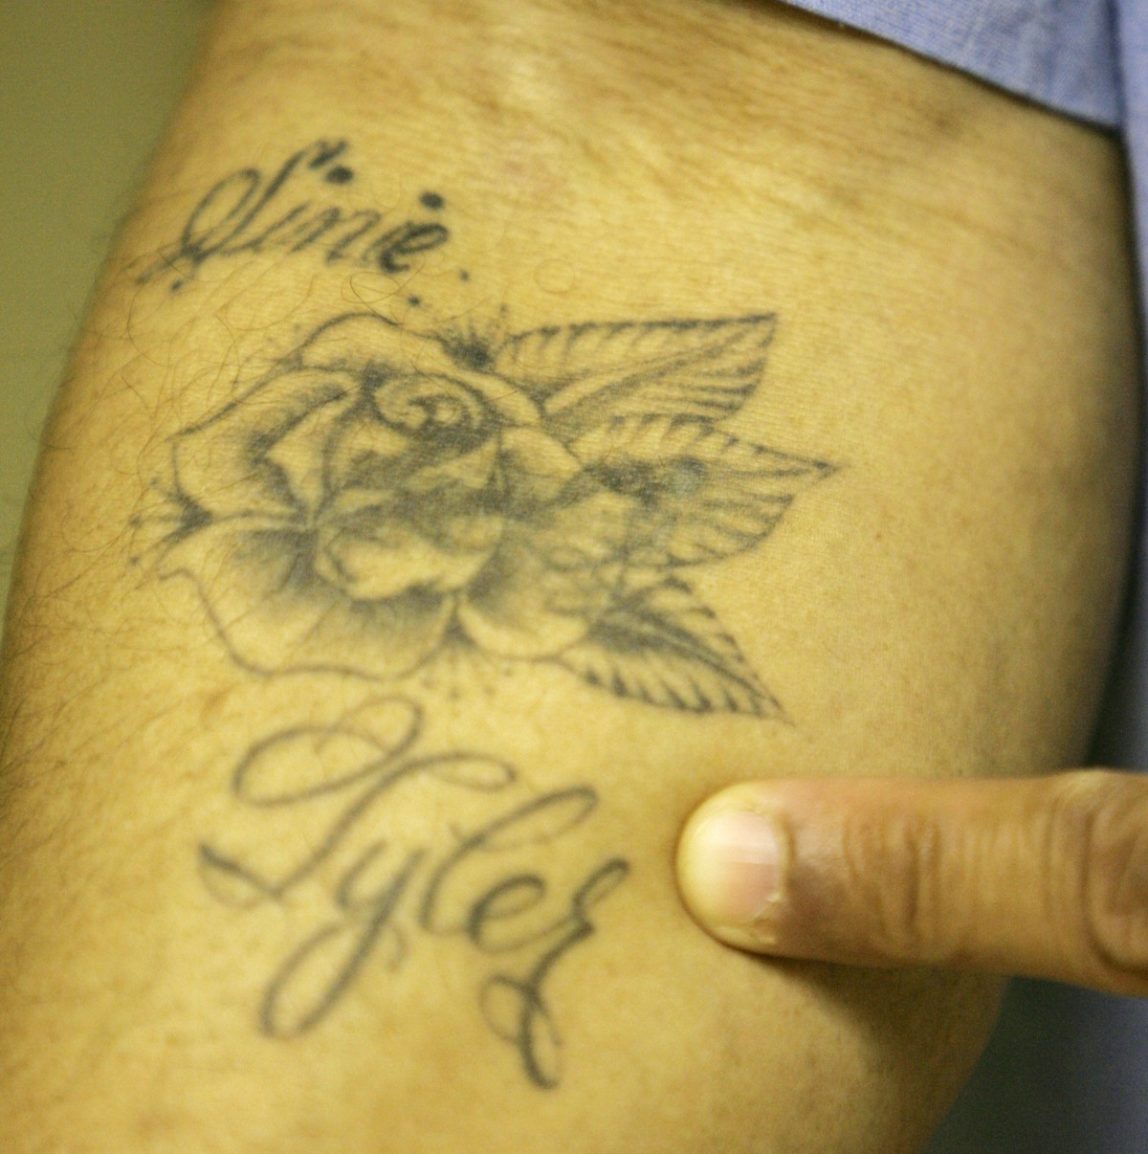 Inmate Anthony Harris points to his prison tattoo at the California Medical Facility in Vacaville, Calif., Jan. 17, 2007. Harris believes he contracted the Hepatitis C virus after getting the tattoo in 1998. (AP Photo/Marcio Jose Sanchez)